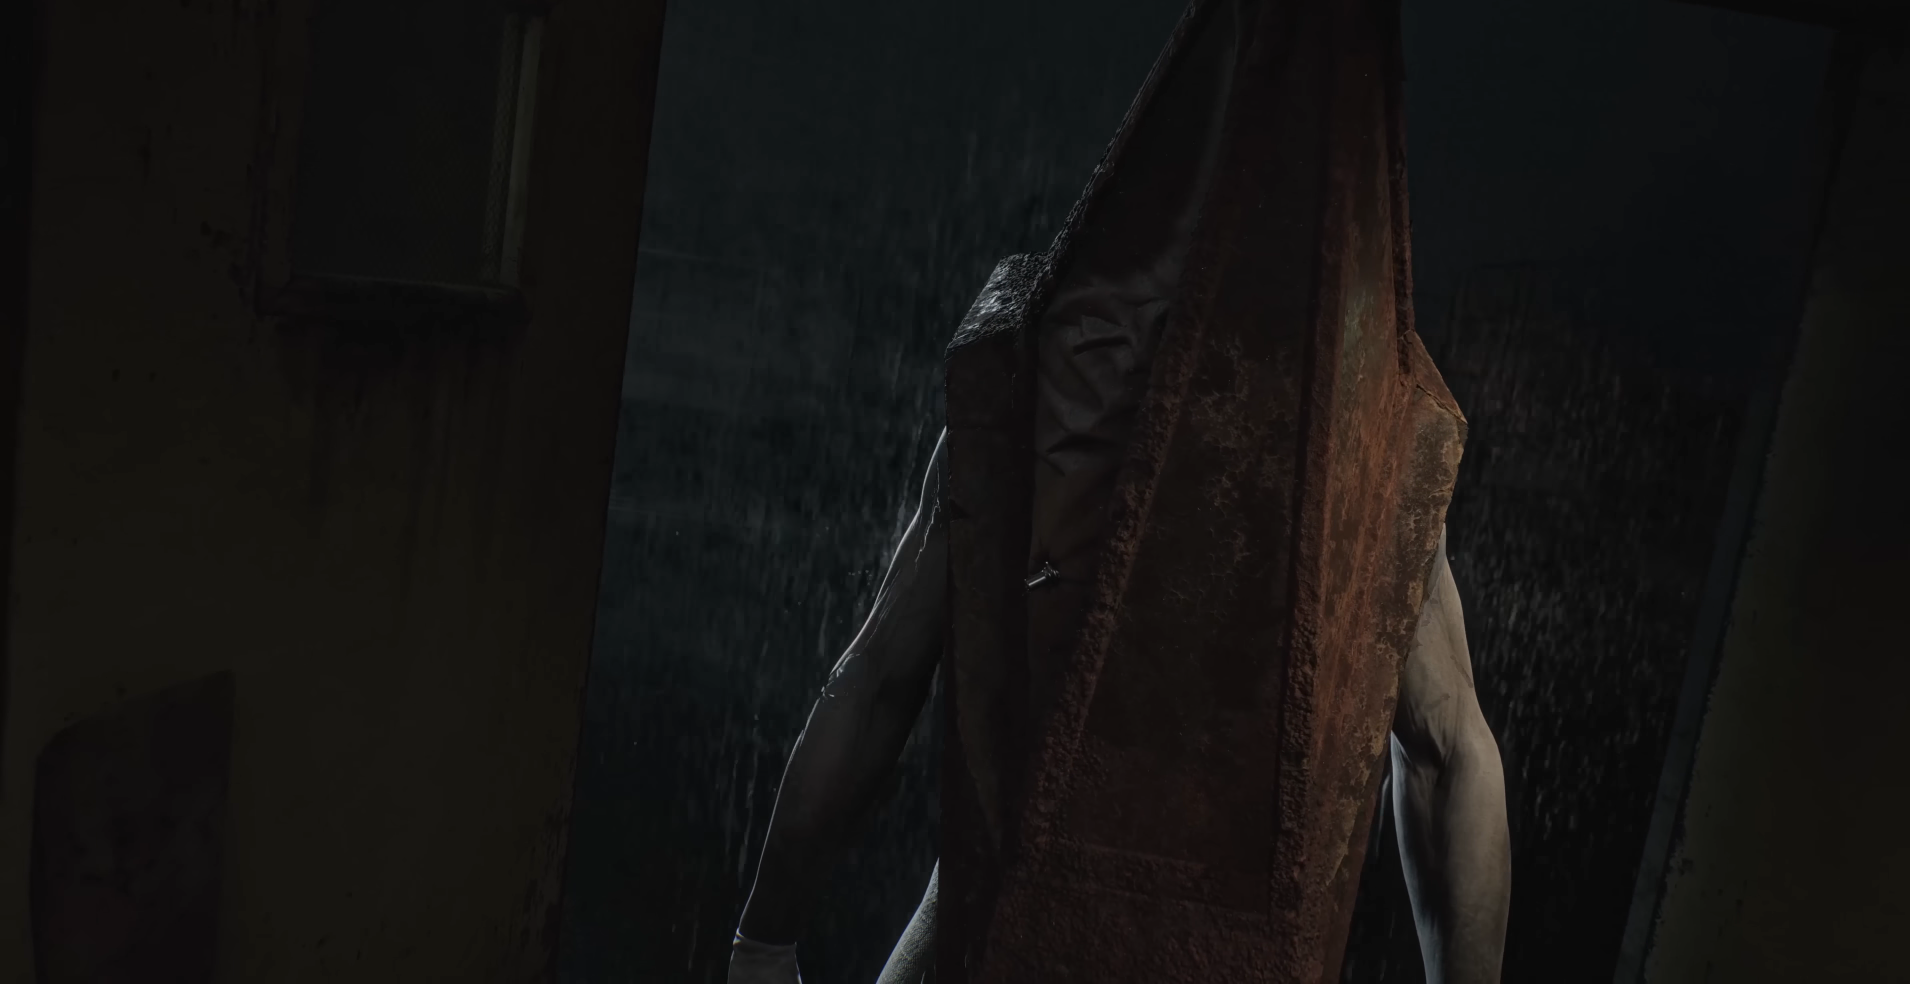 Silent Hill 2 remake coming to PC, has 12-month exclusivity on PS5